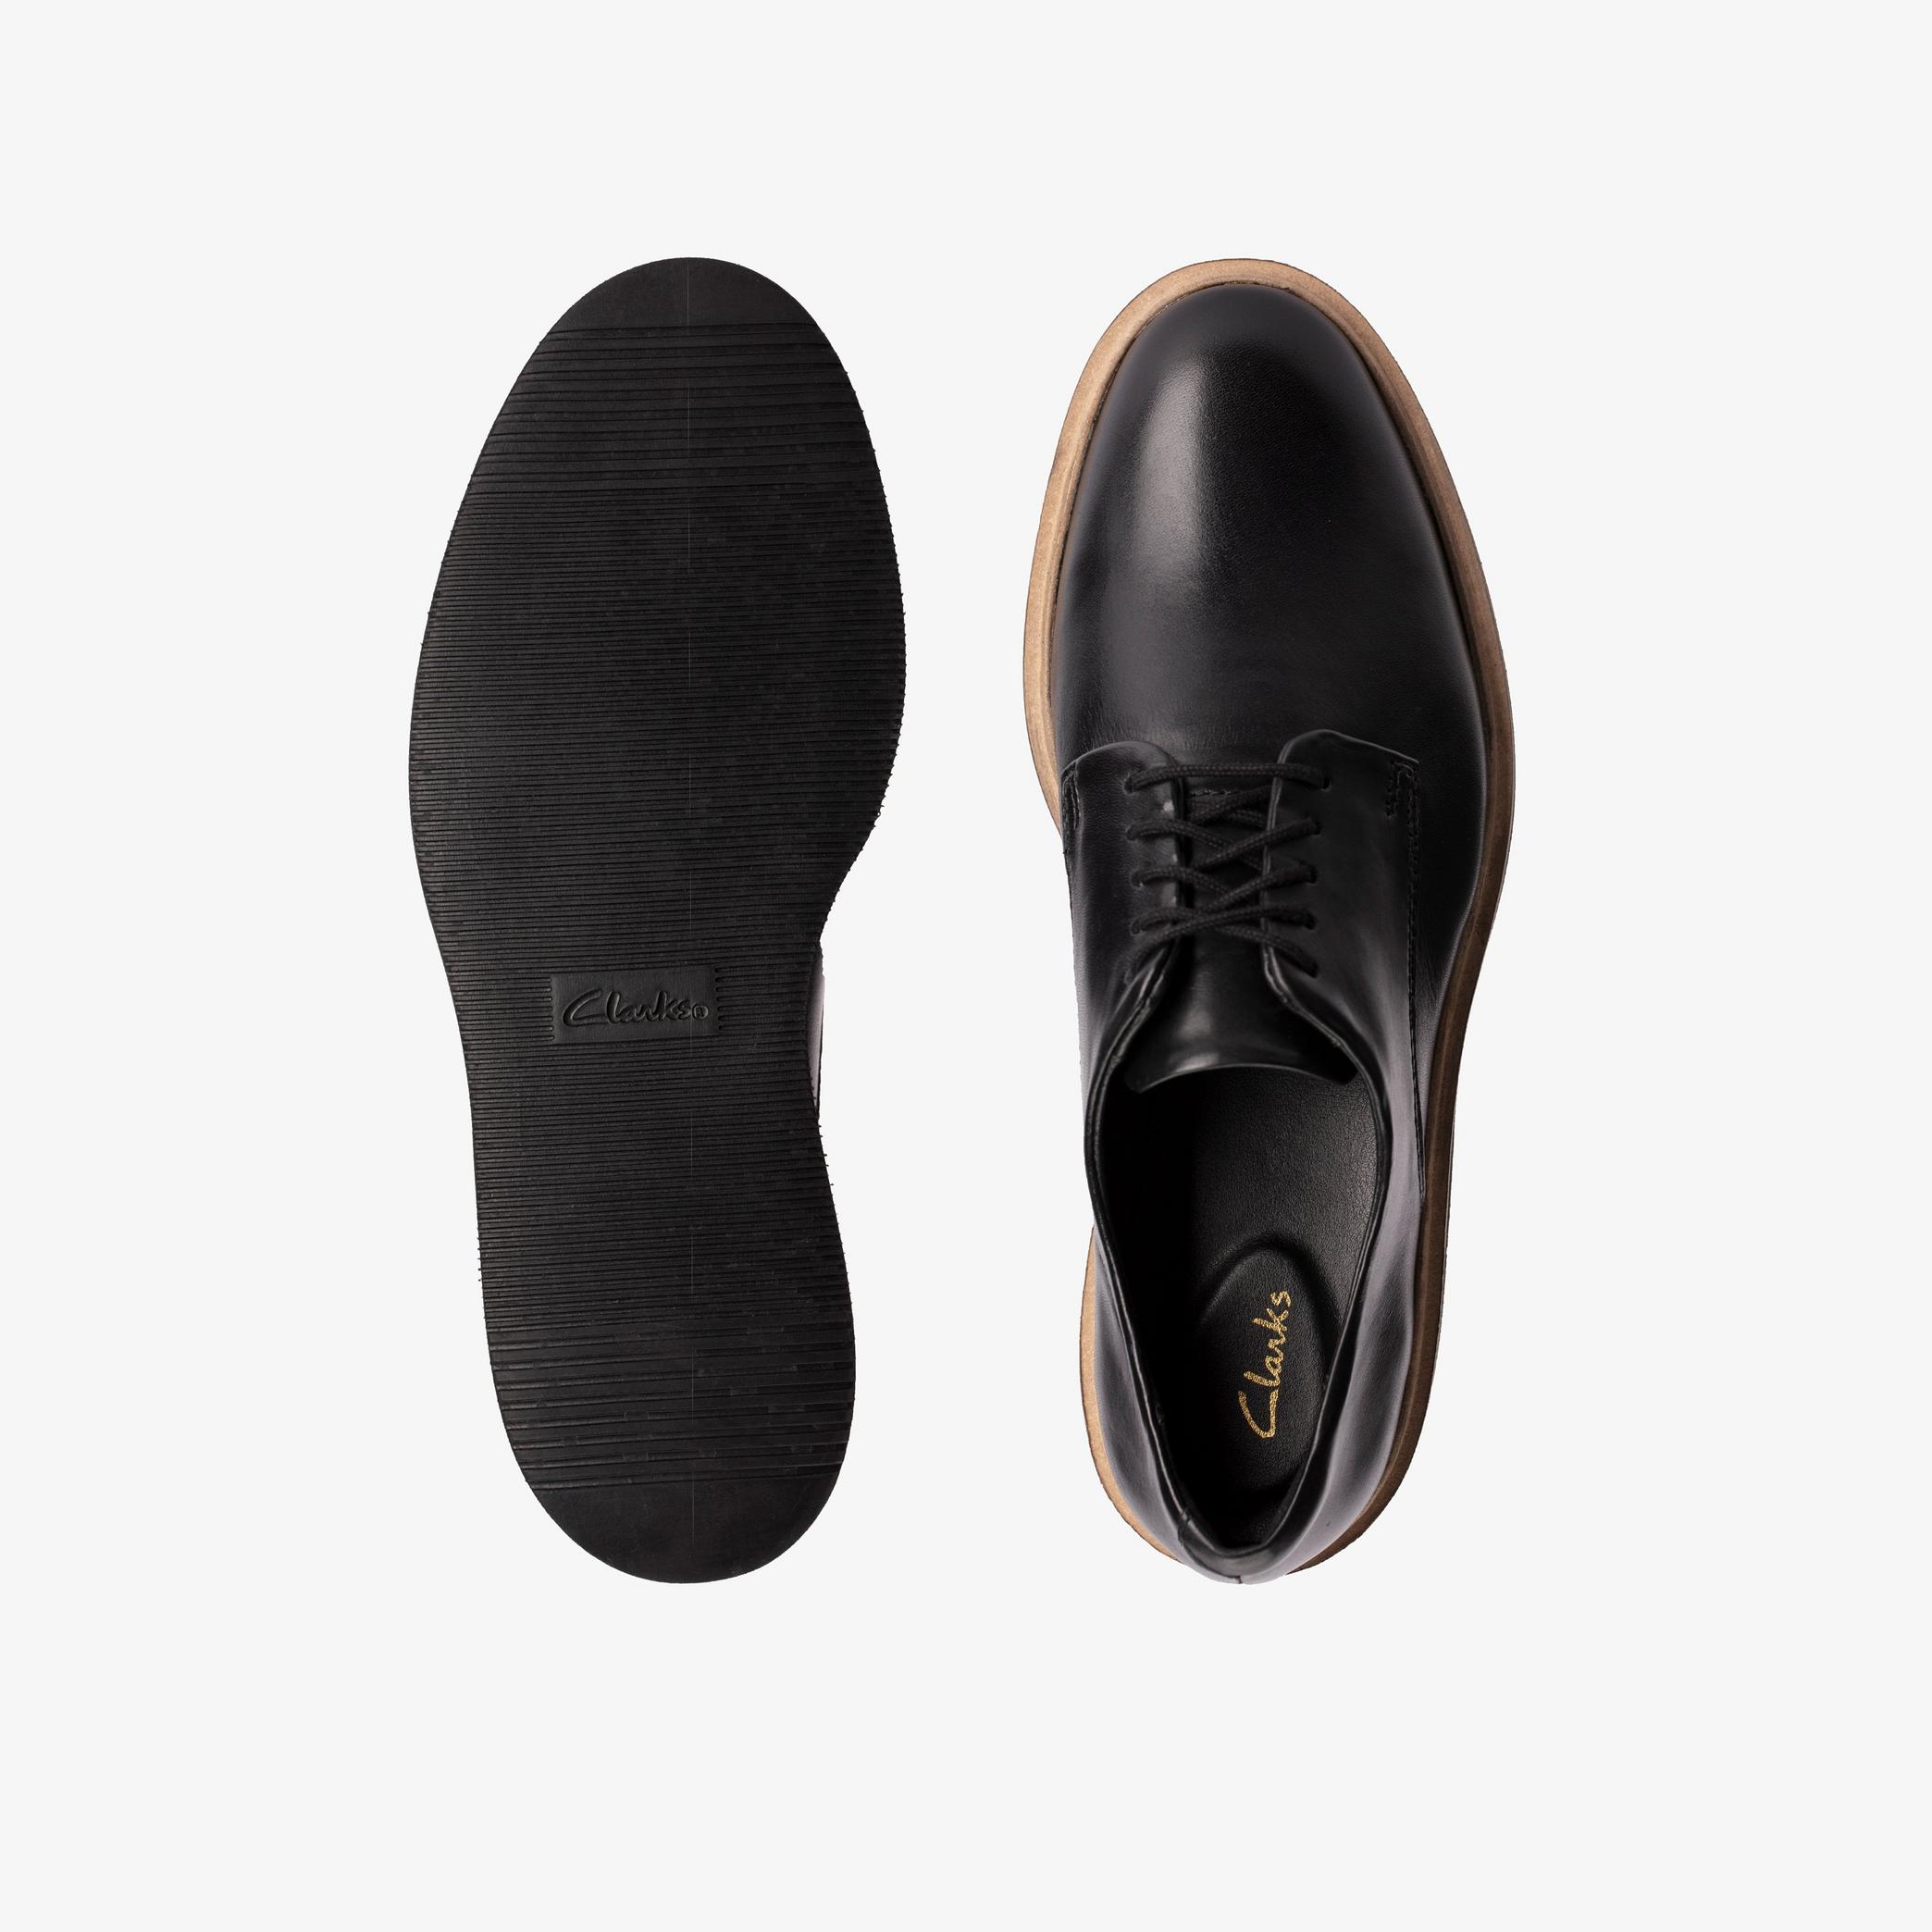 Glickly Derby Black Leather Derby Shoe, view 6 of 6